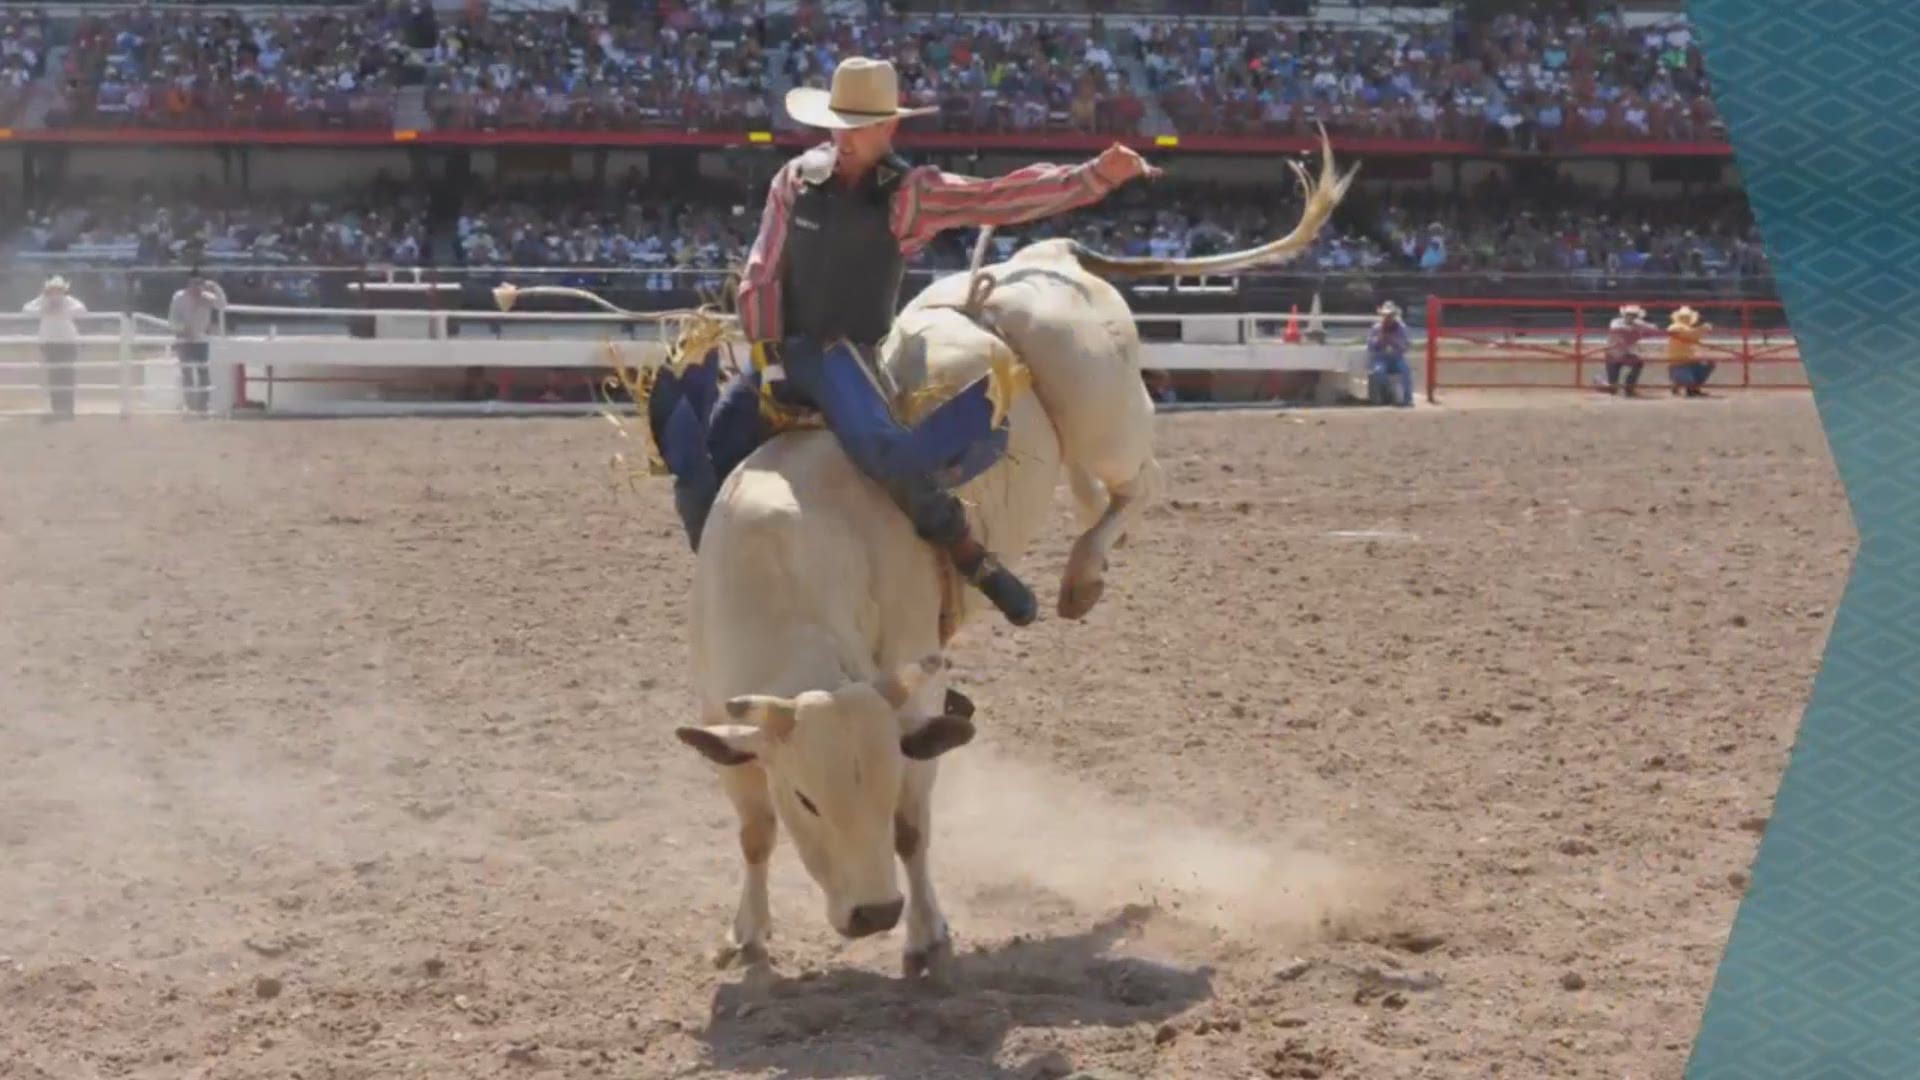 Held the last full week of July, the "Daddy of 'em All" — Cheyenne Frontier Days (CFD) — has been held since 1897 so that Cheyenne can celebrate its Old West roots.